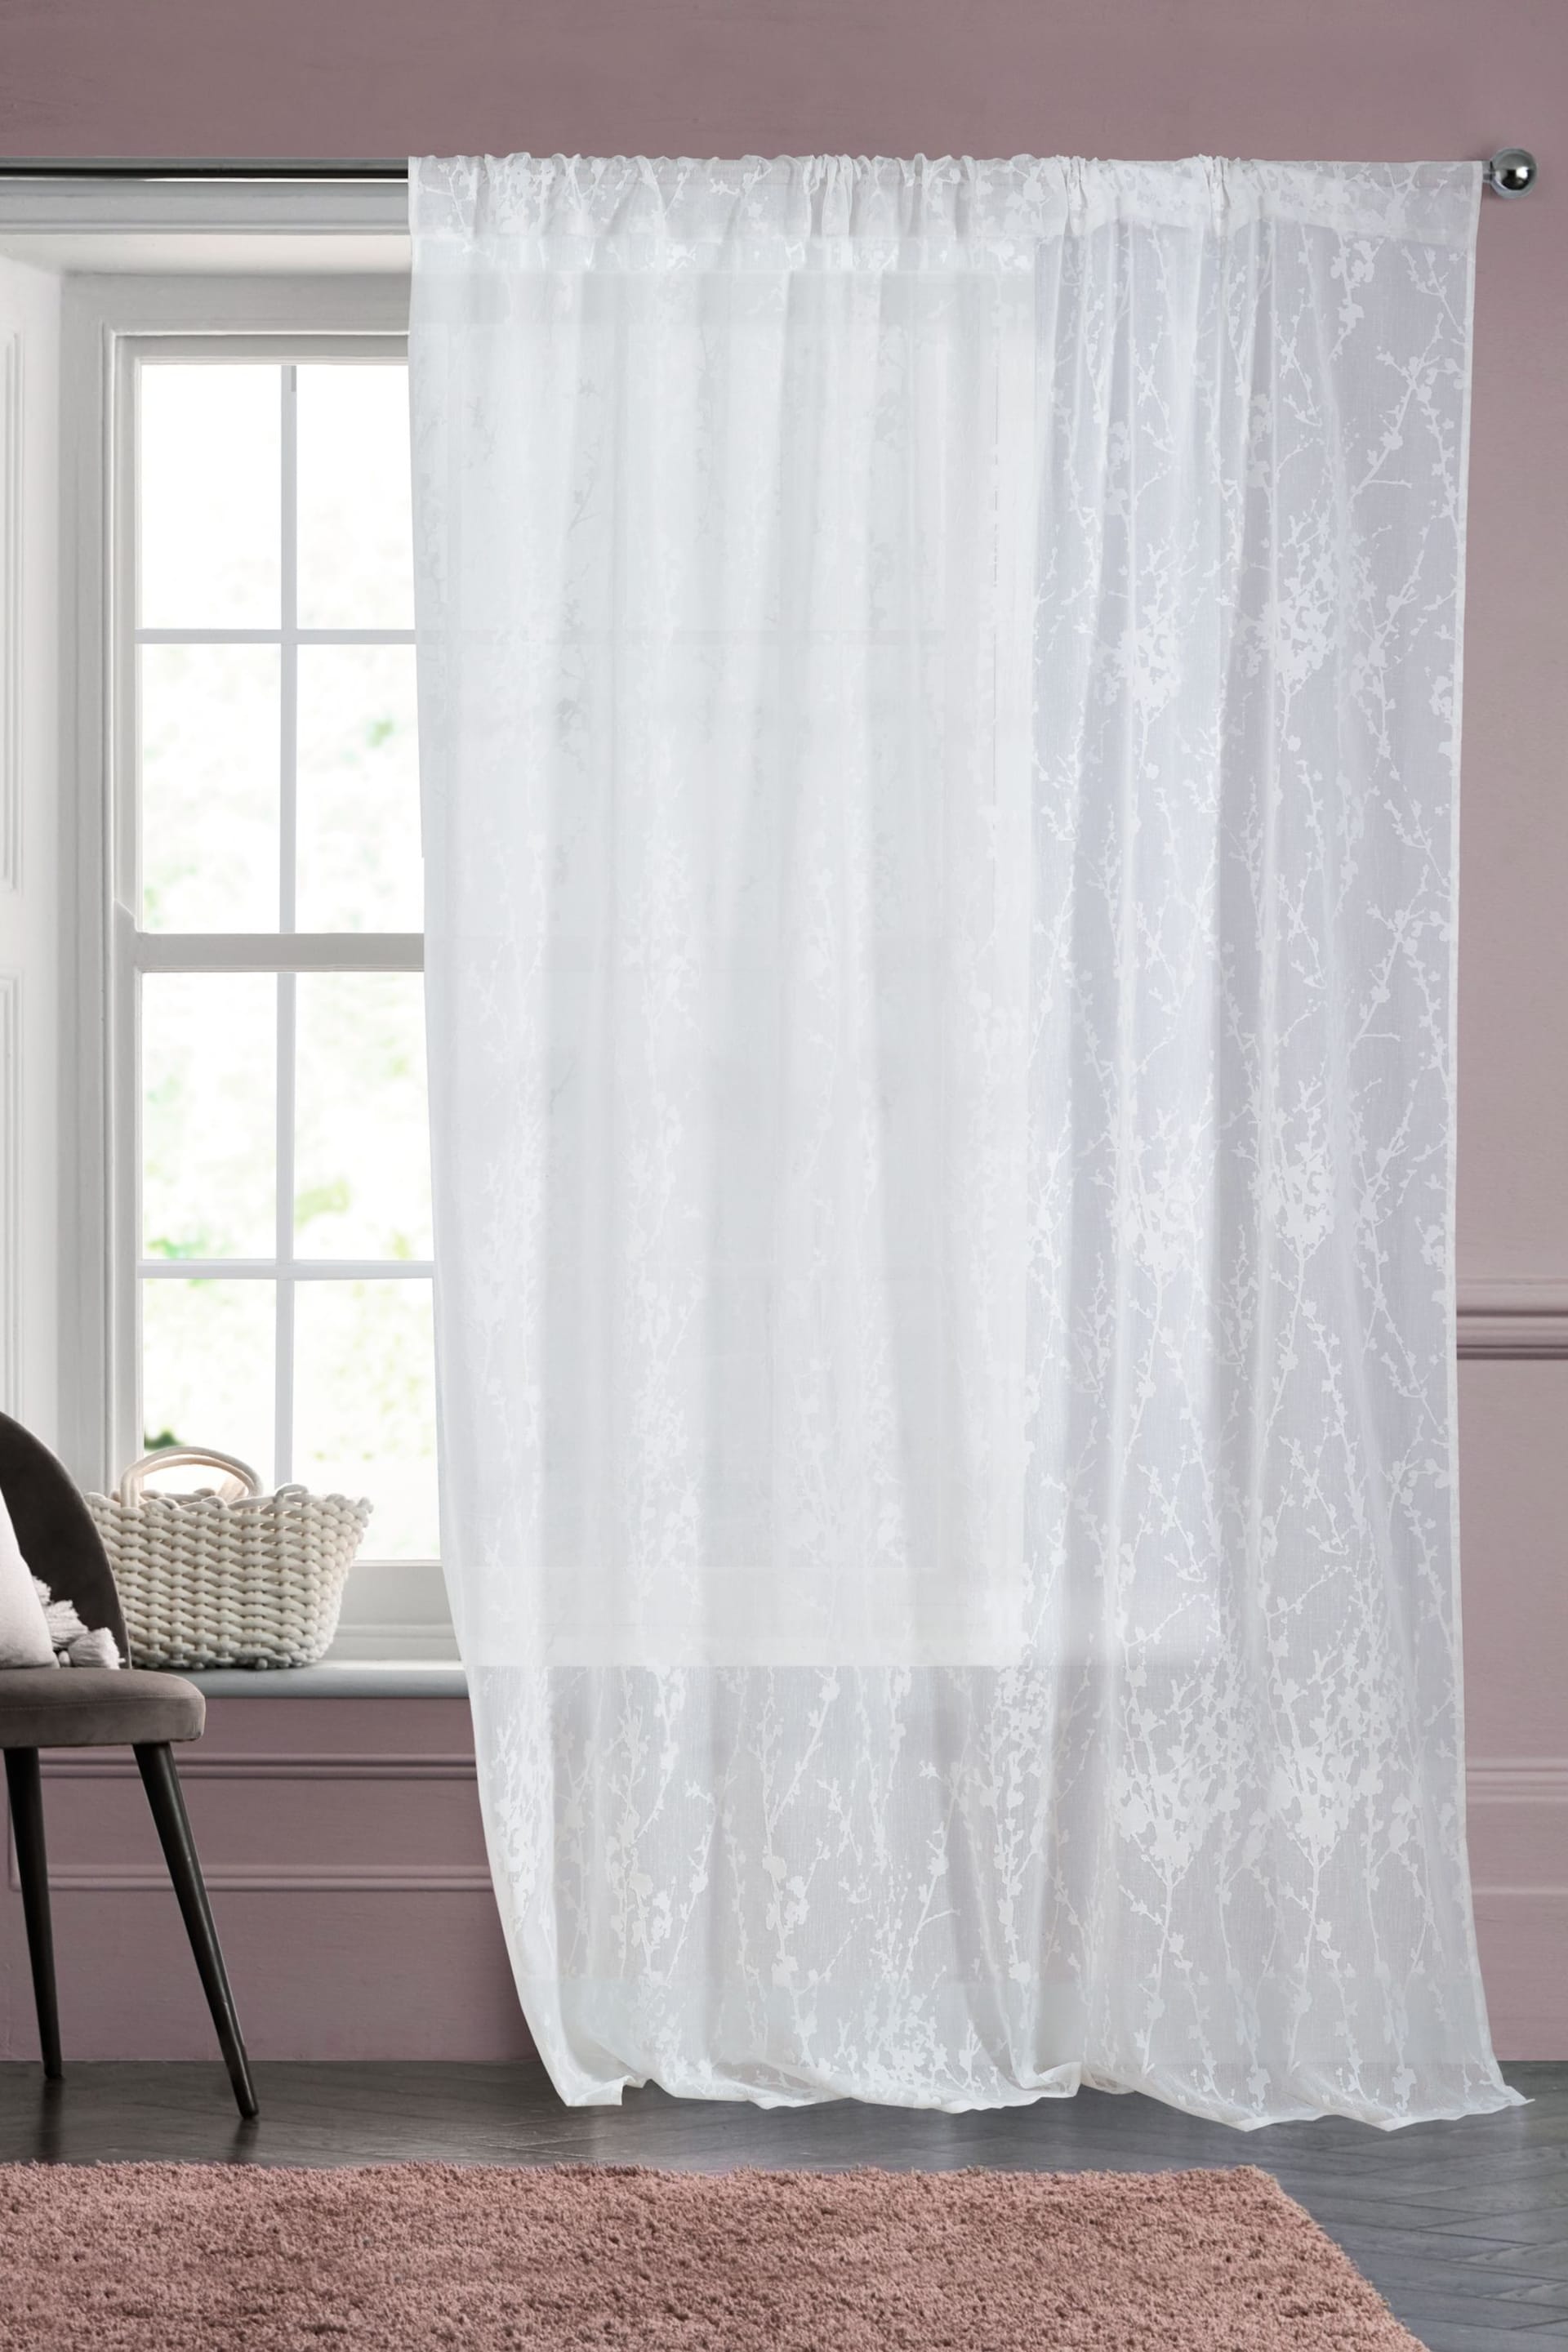 White Blossom Voile Slot Top Unlined Sheer Panel Curtain - Image 2 of 3